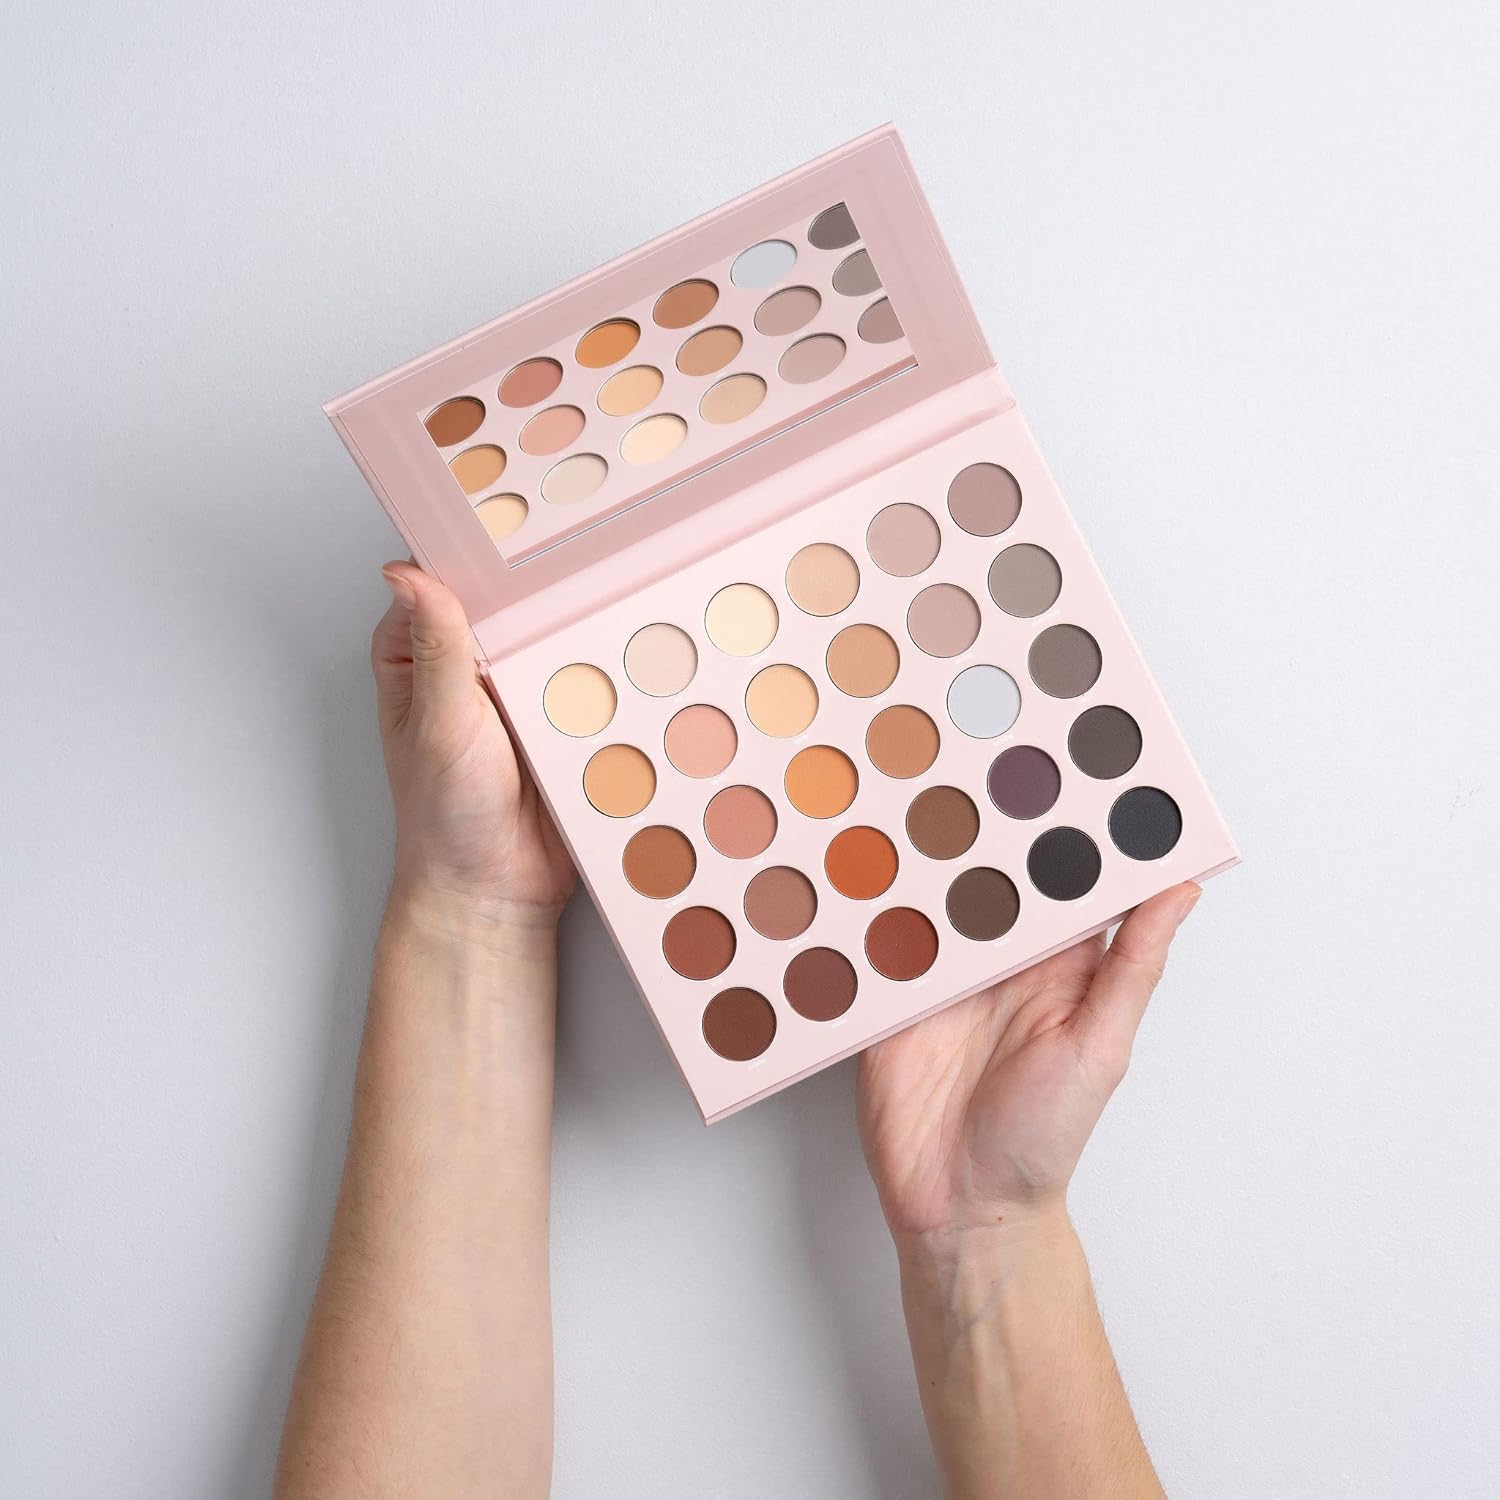 W7 Just Mattes Pressed Pigment Palette - 30 Natural Nude Colors - Flawless Long-Lasting Every Day Vegan Makeup : Beauty & Personal Care